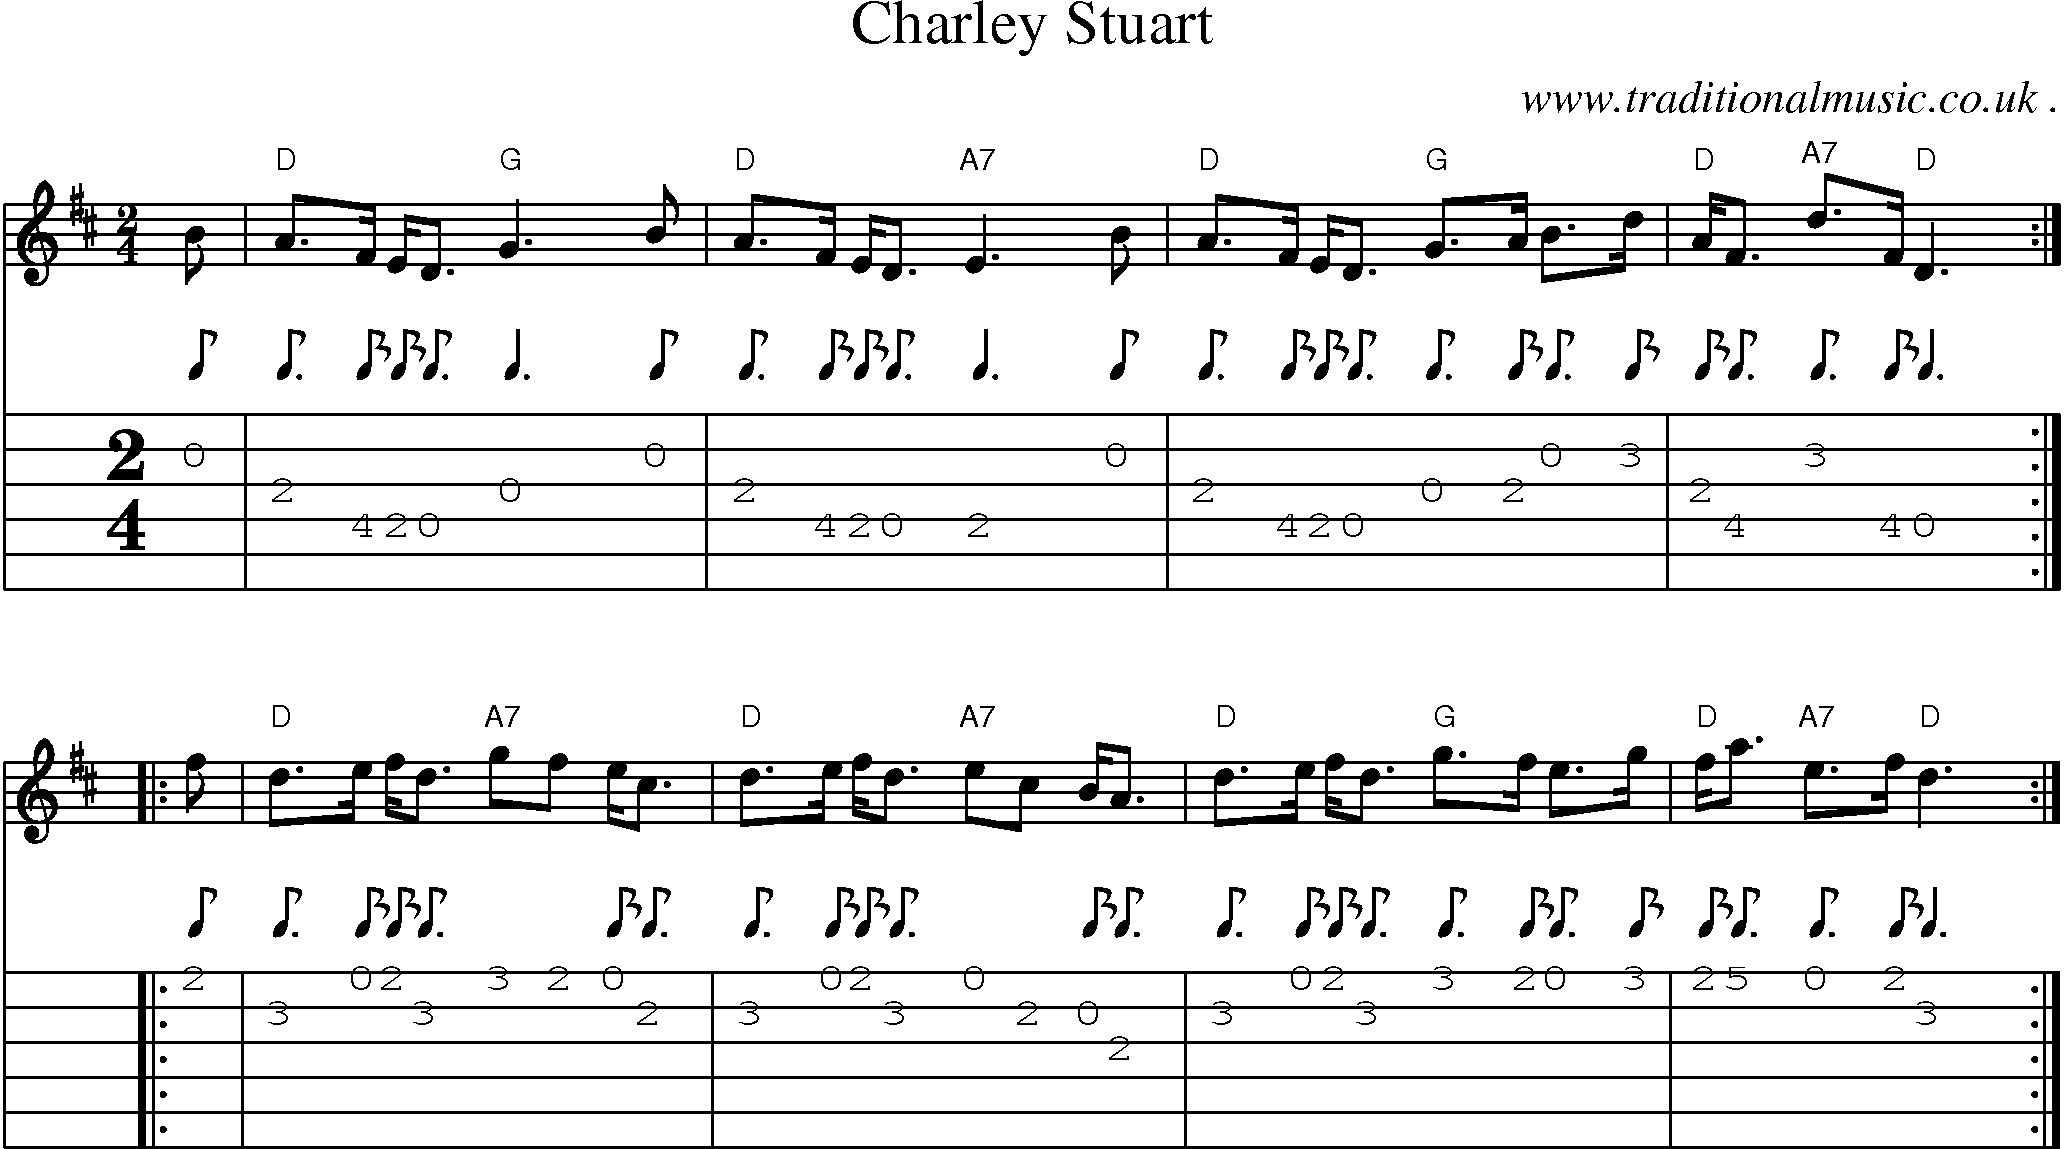 Sheet-music  score, Chords and Guitar Tabs for Charley Stuart